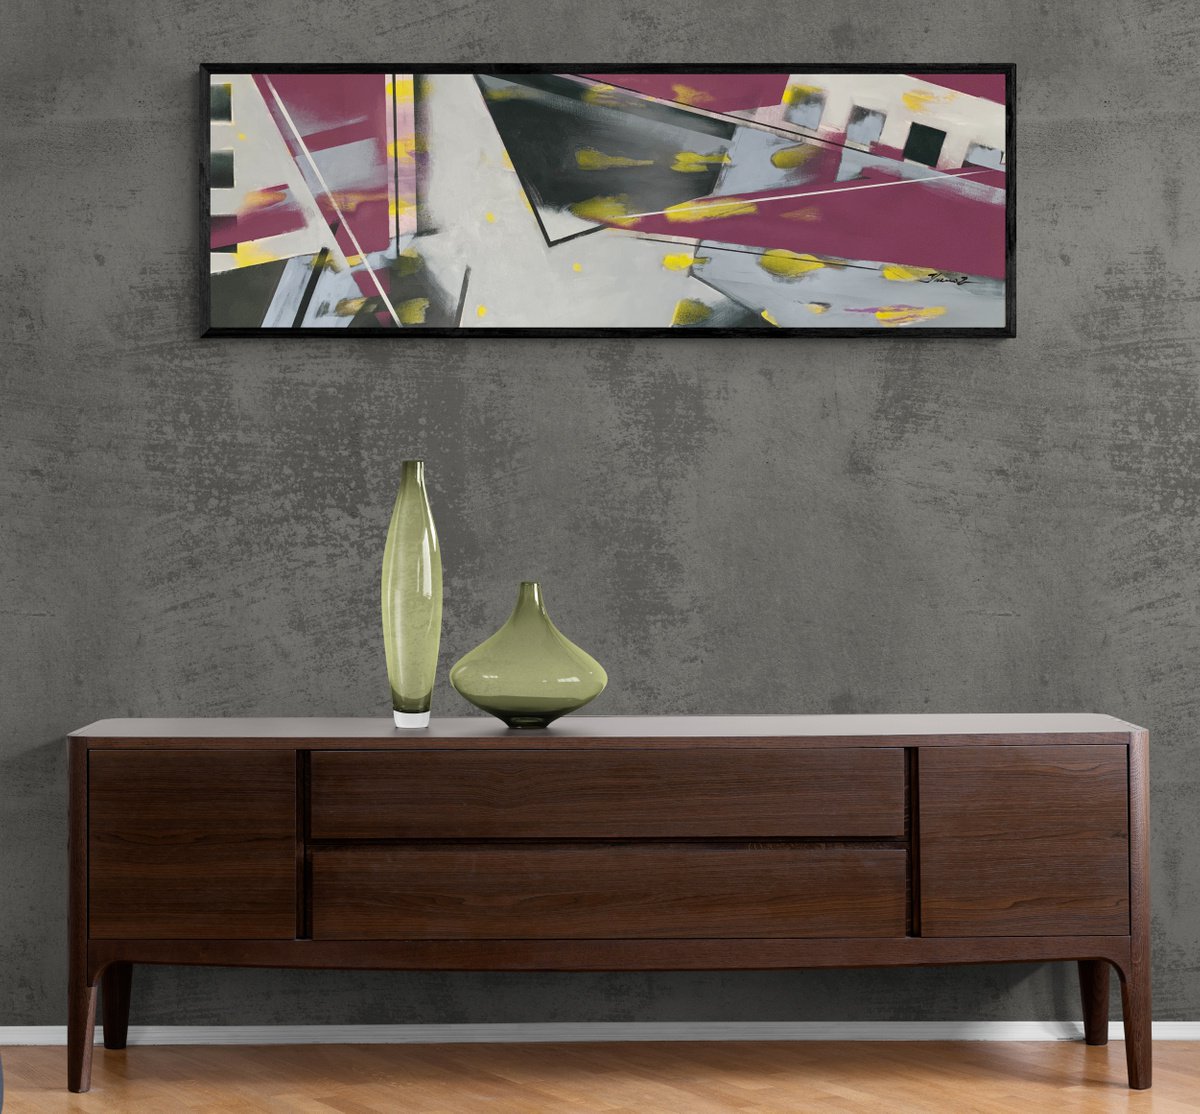 Abstract painting - Urban abstract - Abstraction - Geometric abstract - 135x45cm by Yaroslav Yasenev